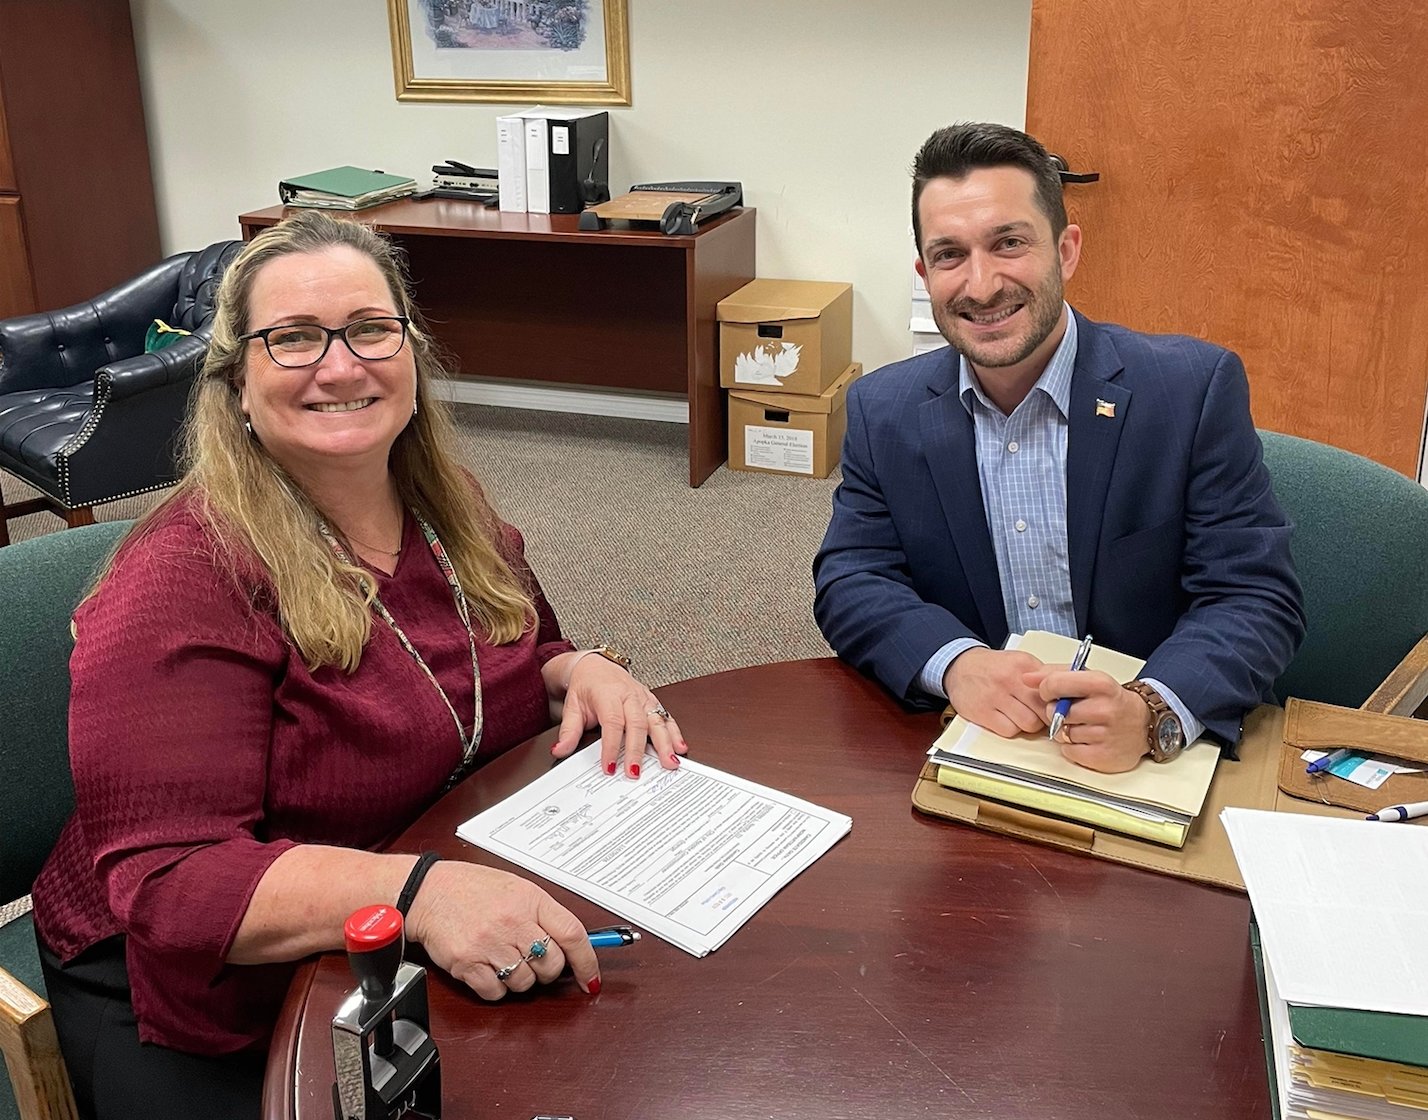 City Clerk Susan Bone (left) assists Nick Nesta (right) with his application to run in the Apopka City Commission election for Seat #4.